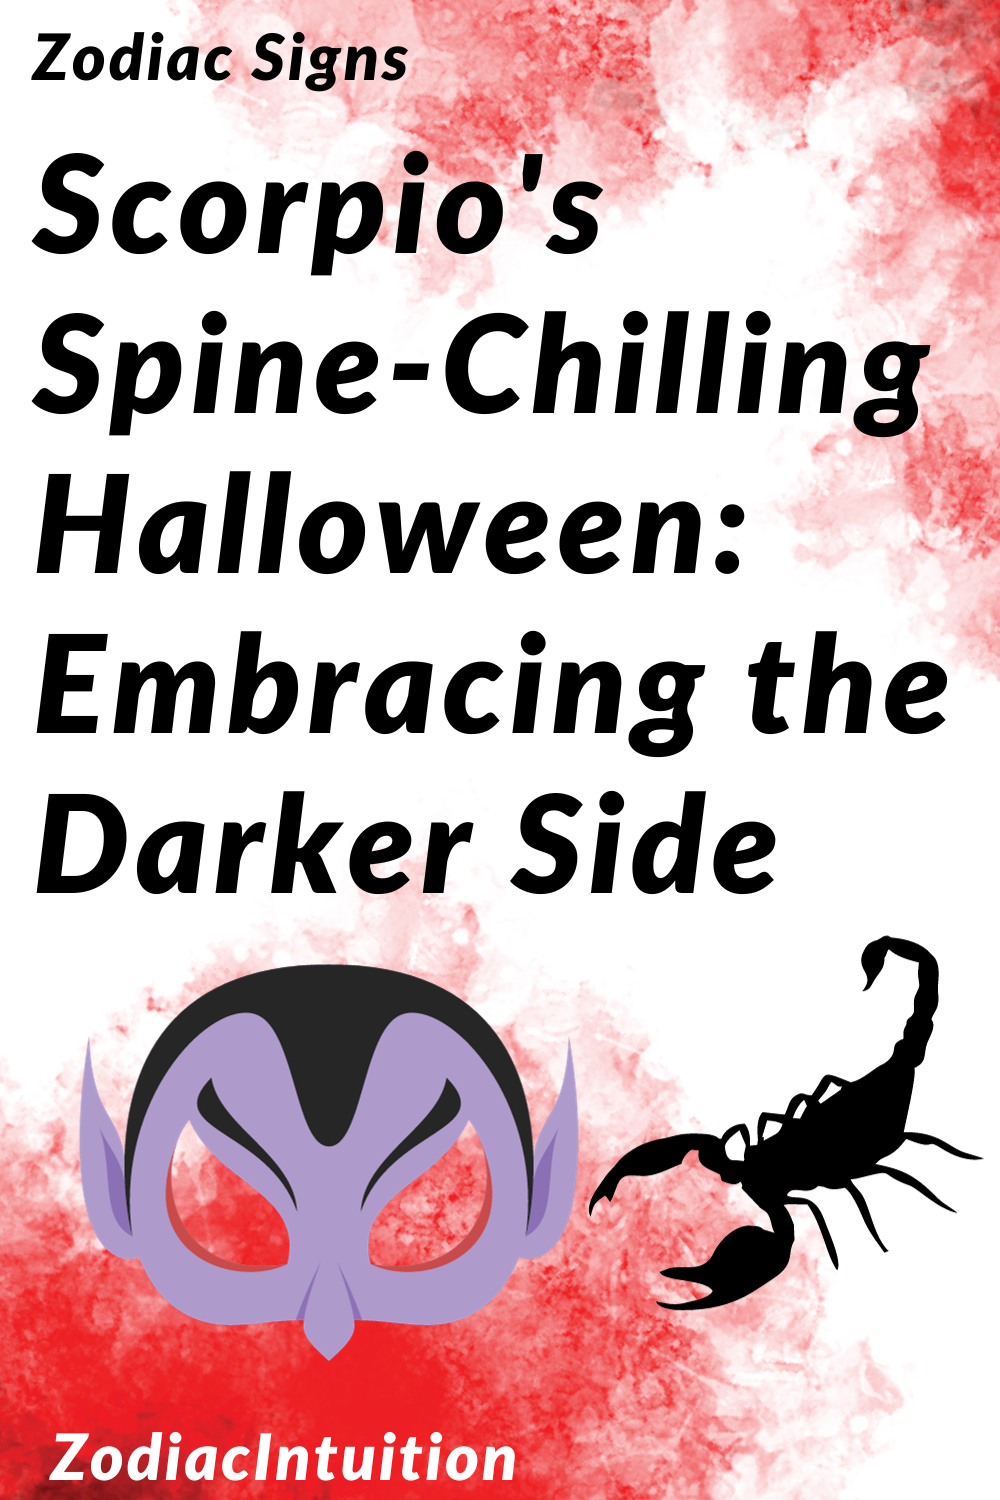 Scorpio's Spine-Chilling Halloween: Embracing the Darker Side